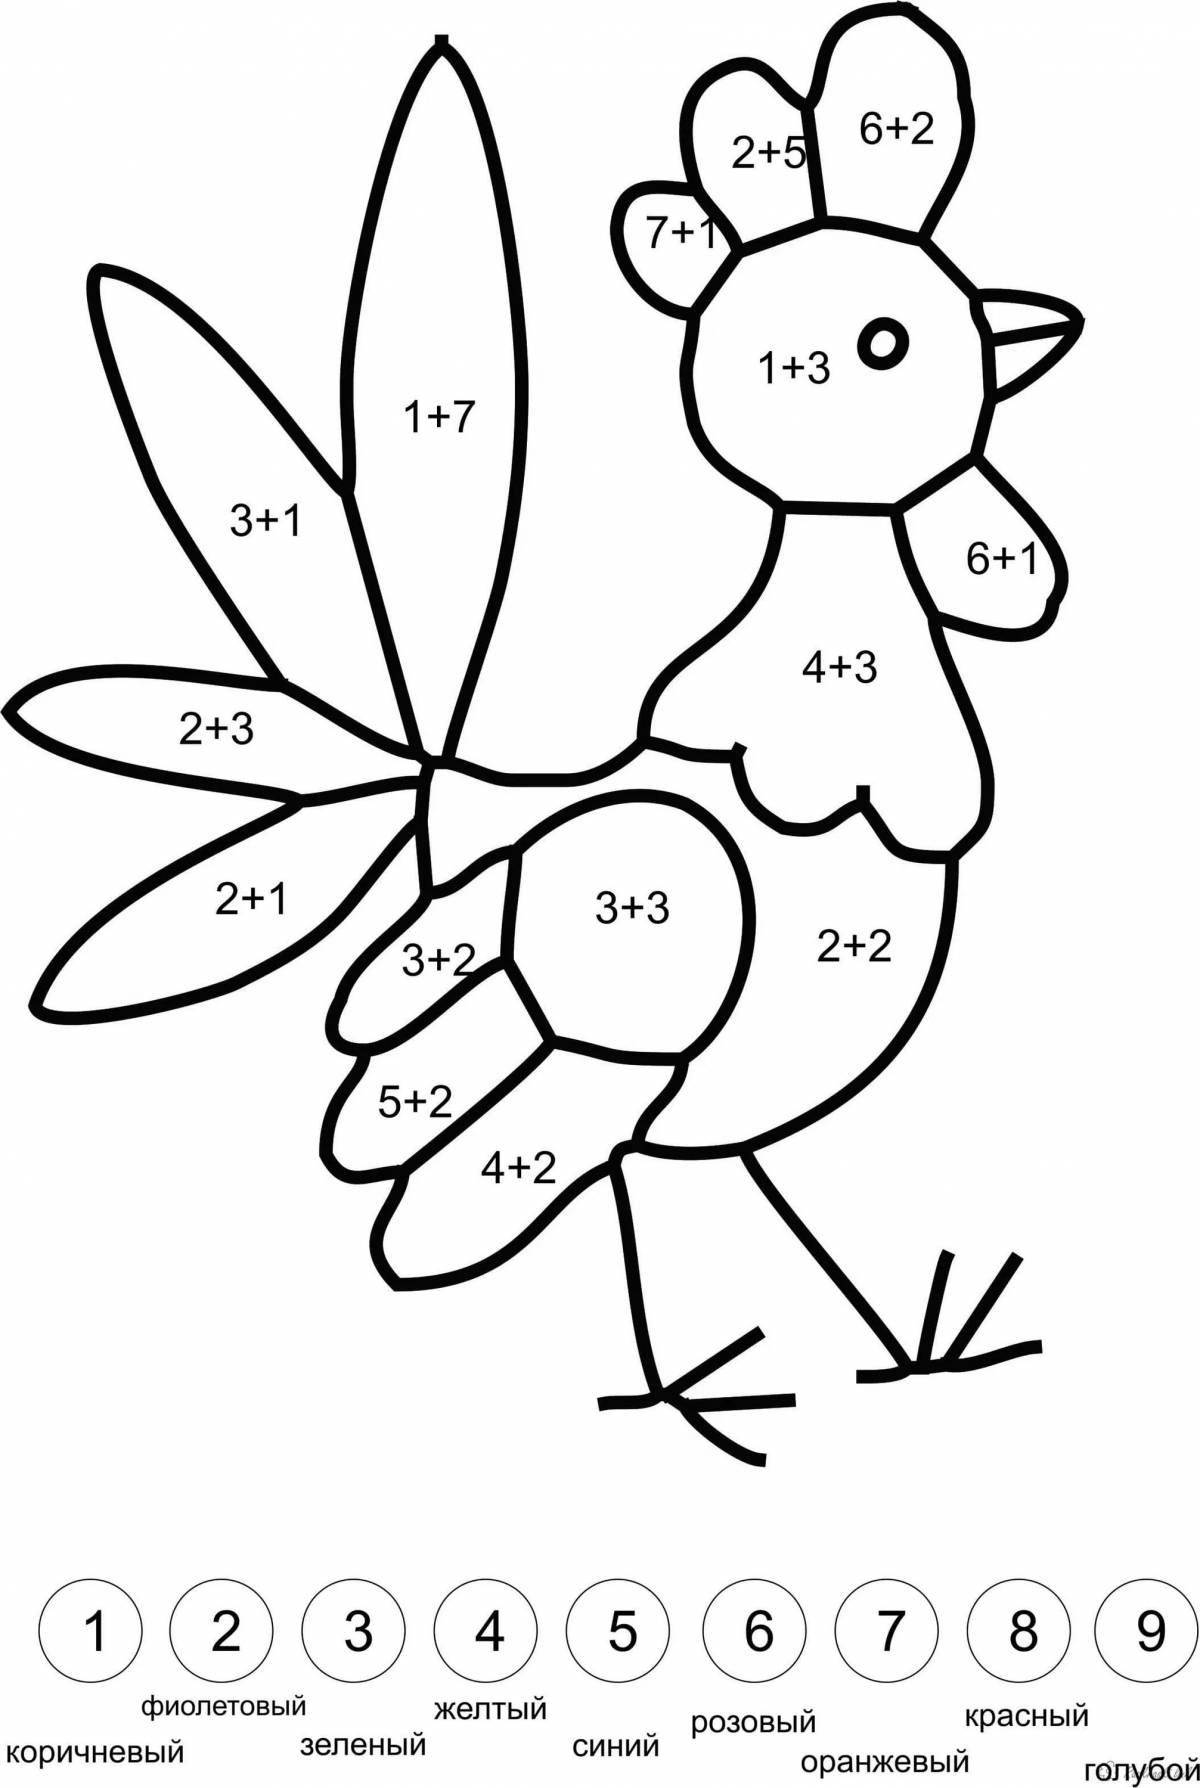 Creative grade 1 number coloring page